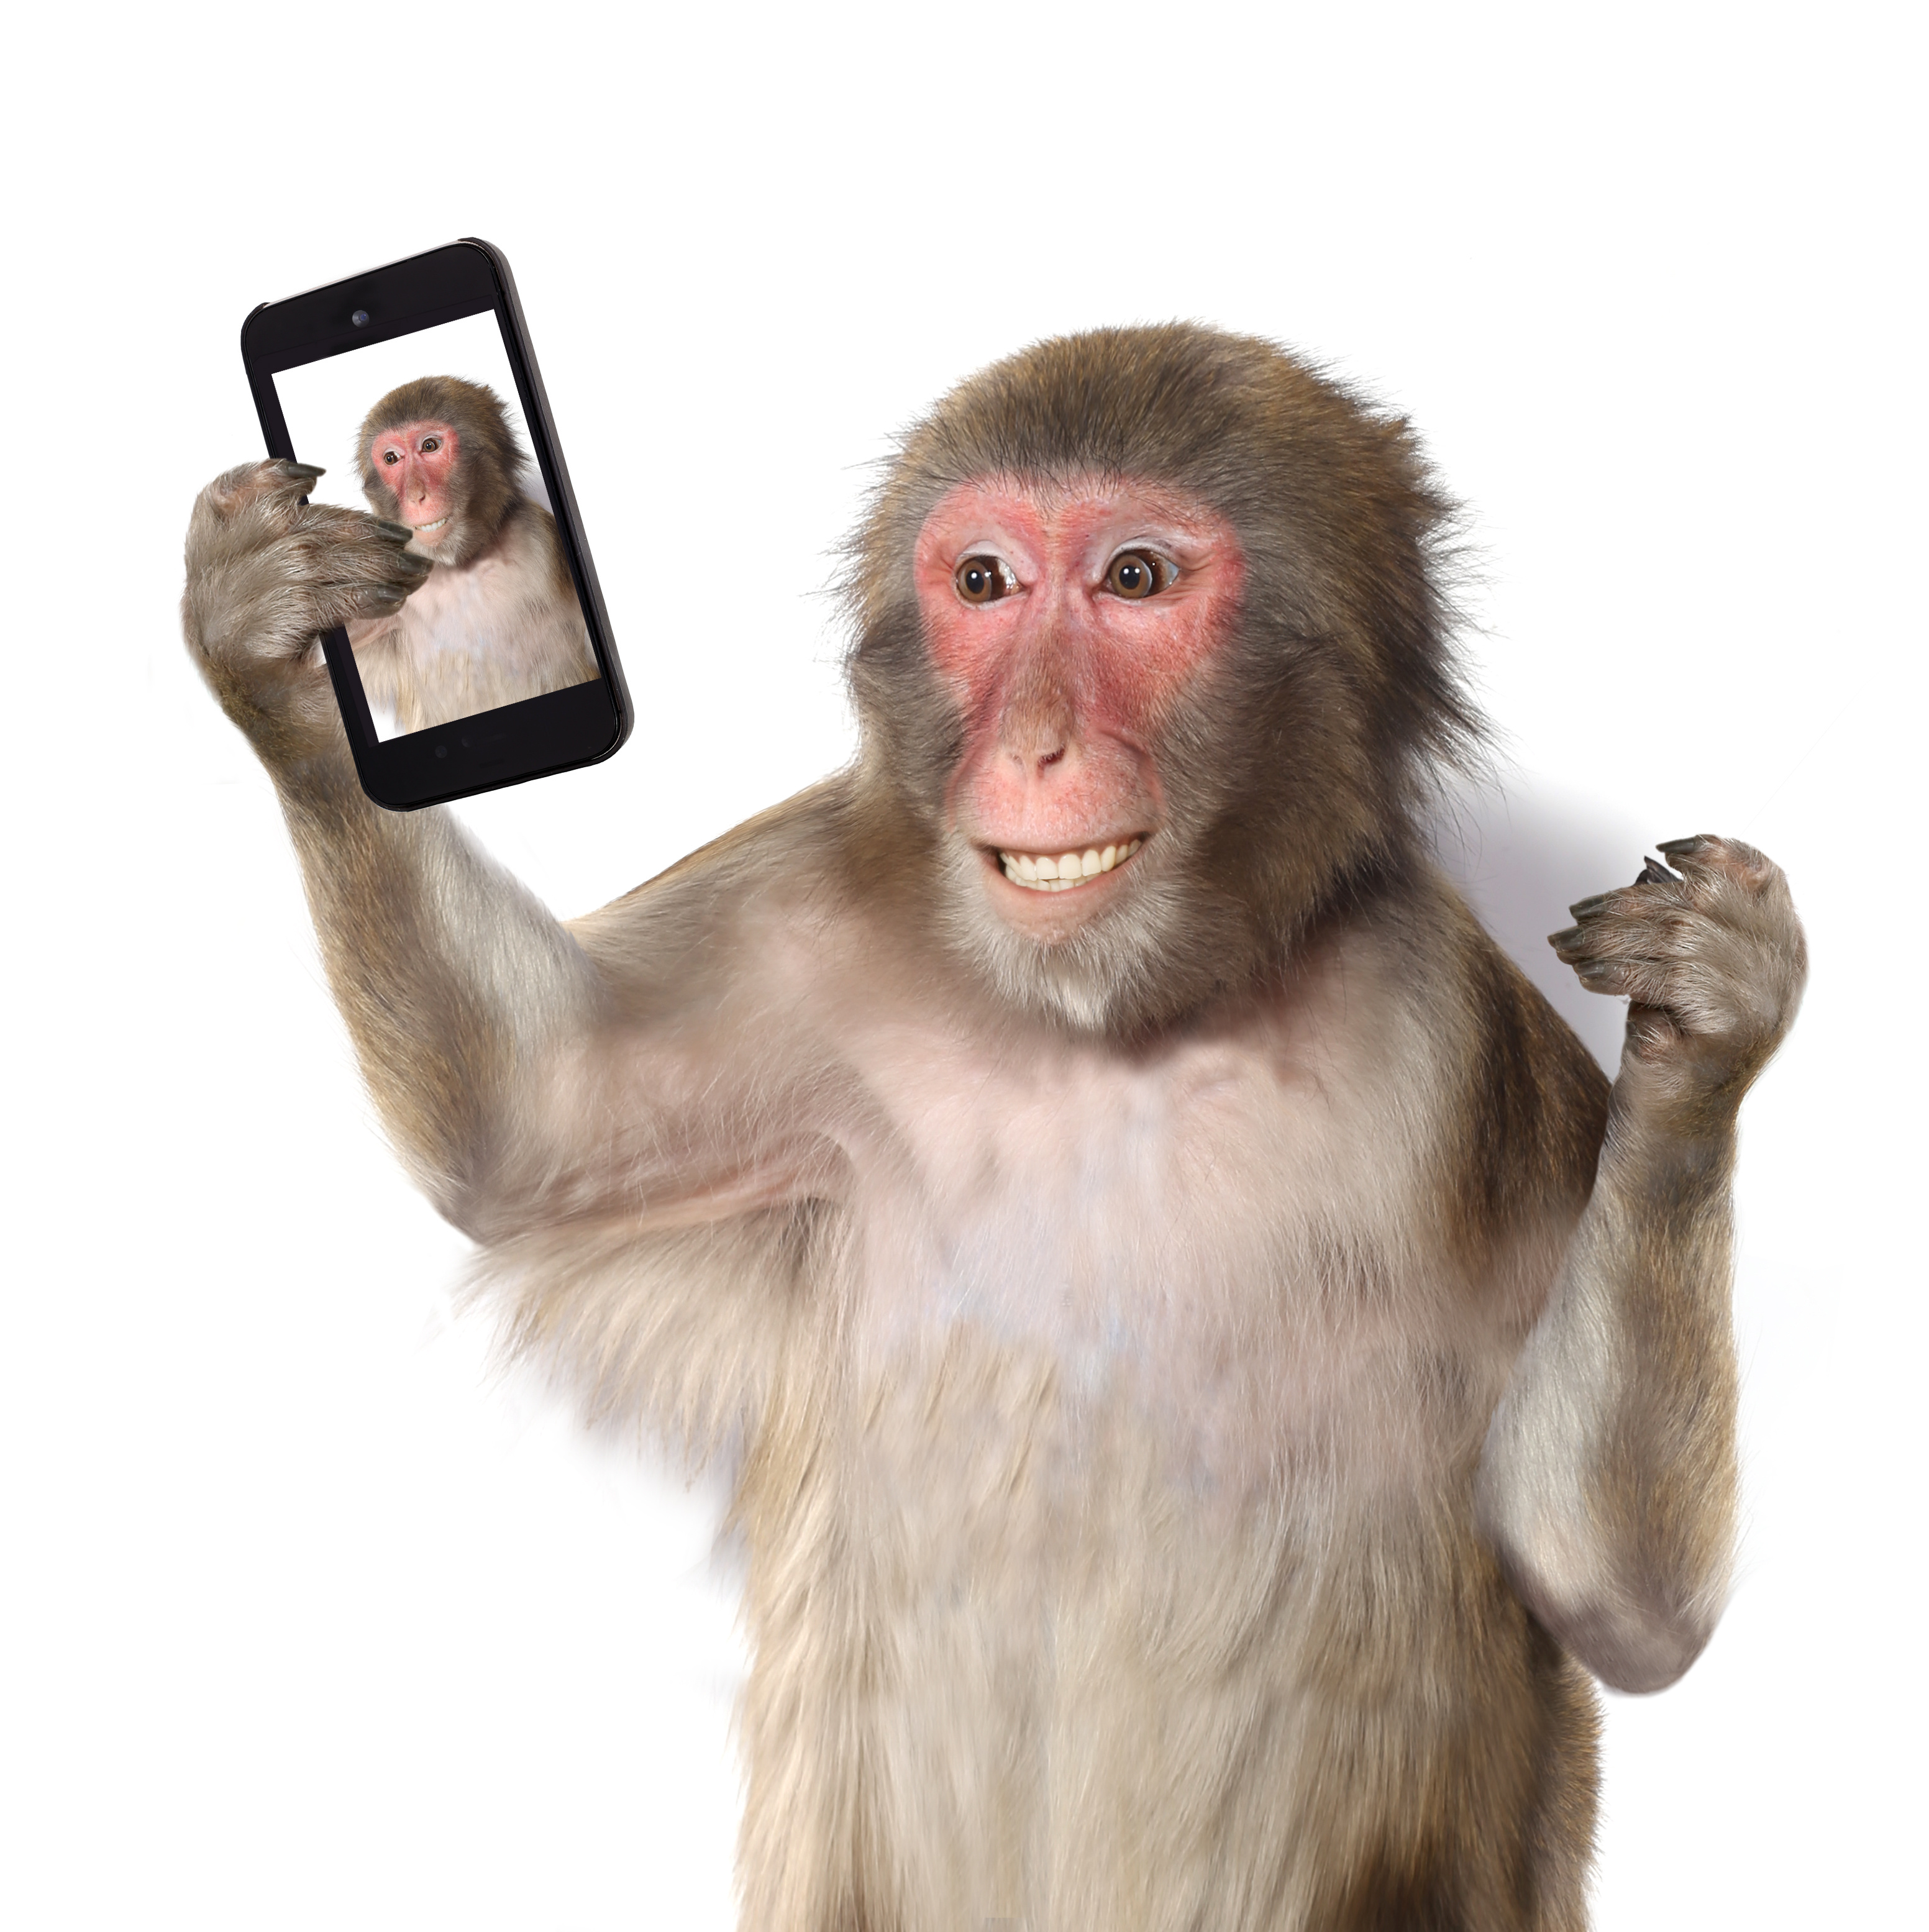 Appearance Releases Aren't Something to Monkey Around With